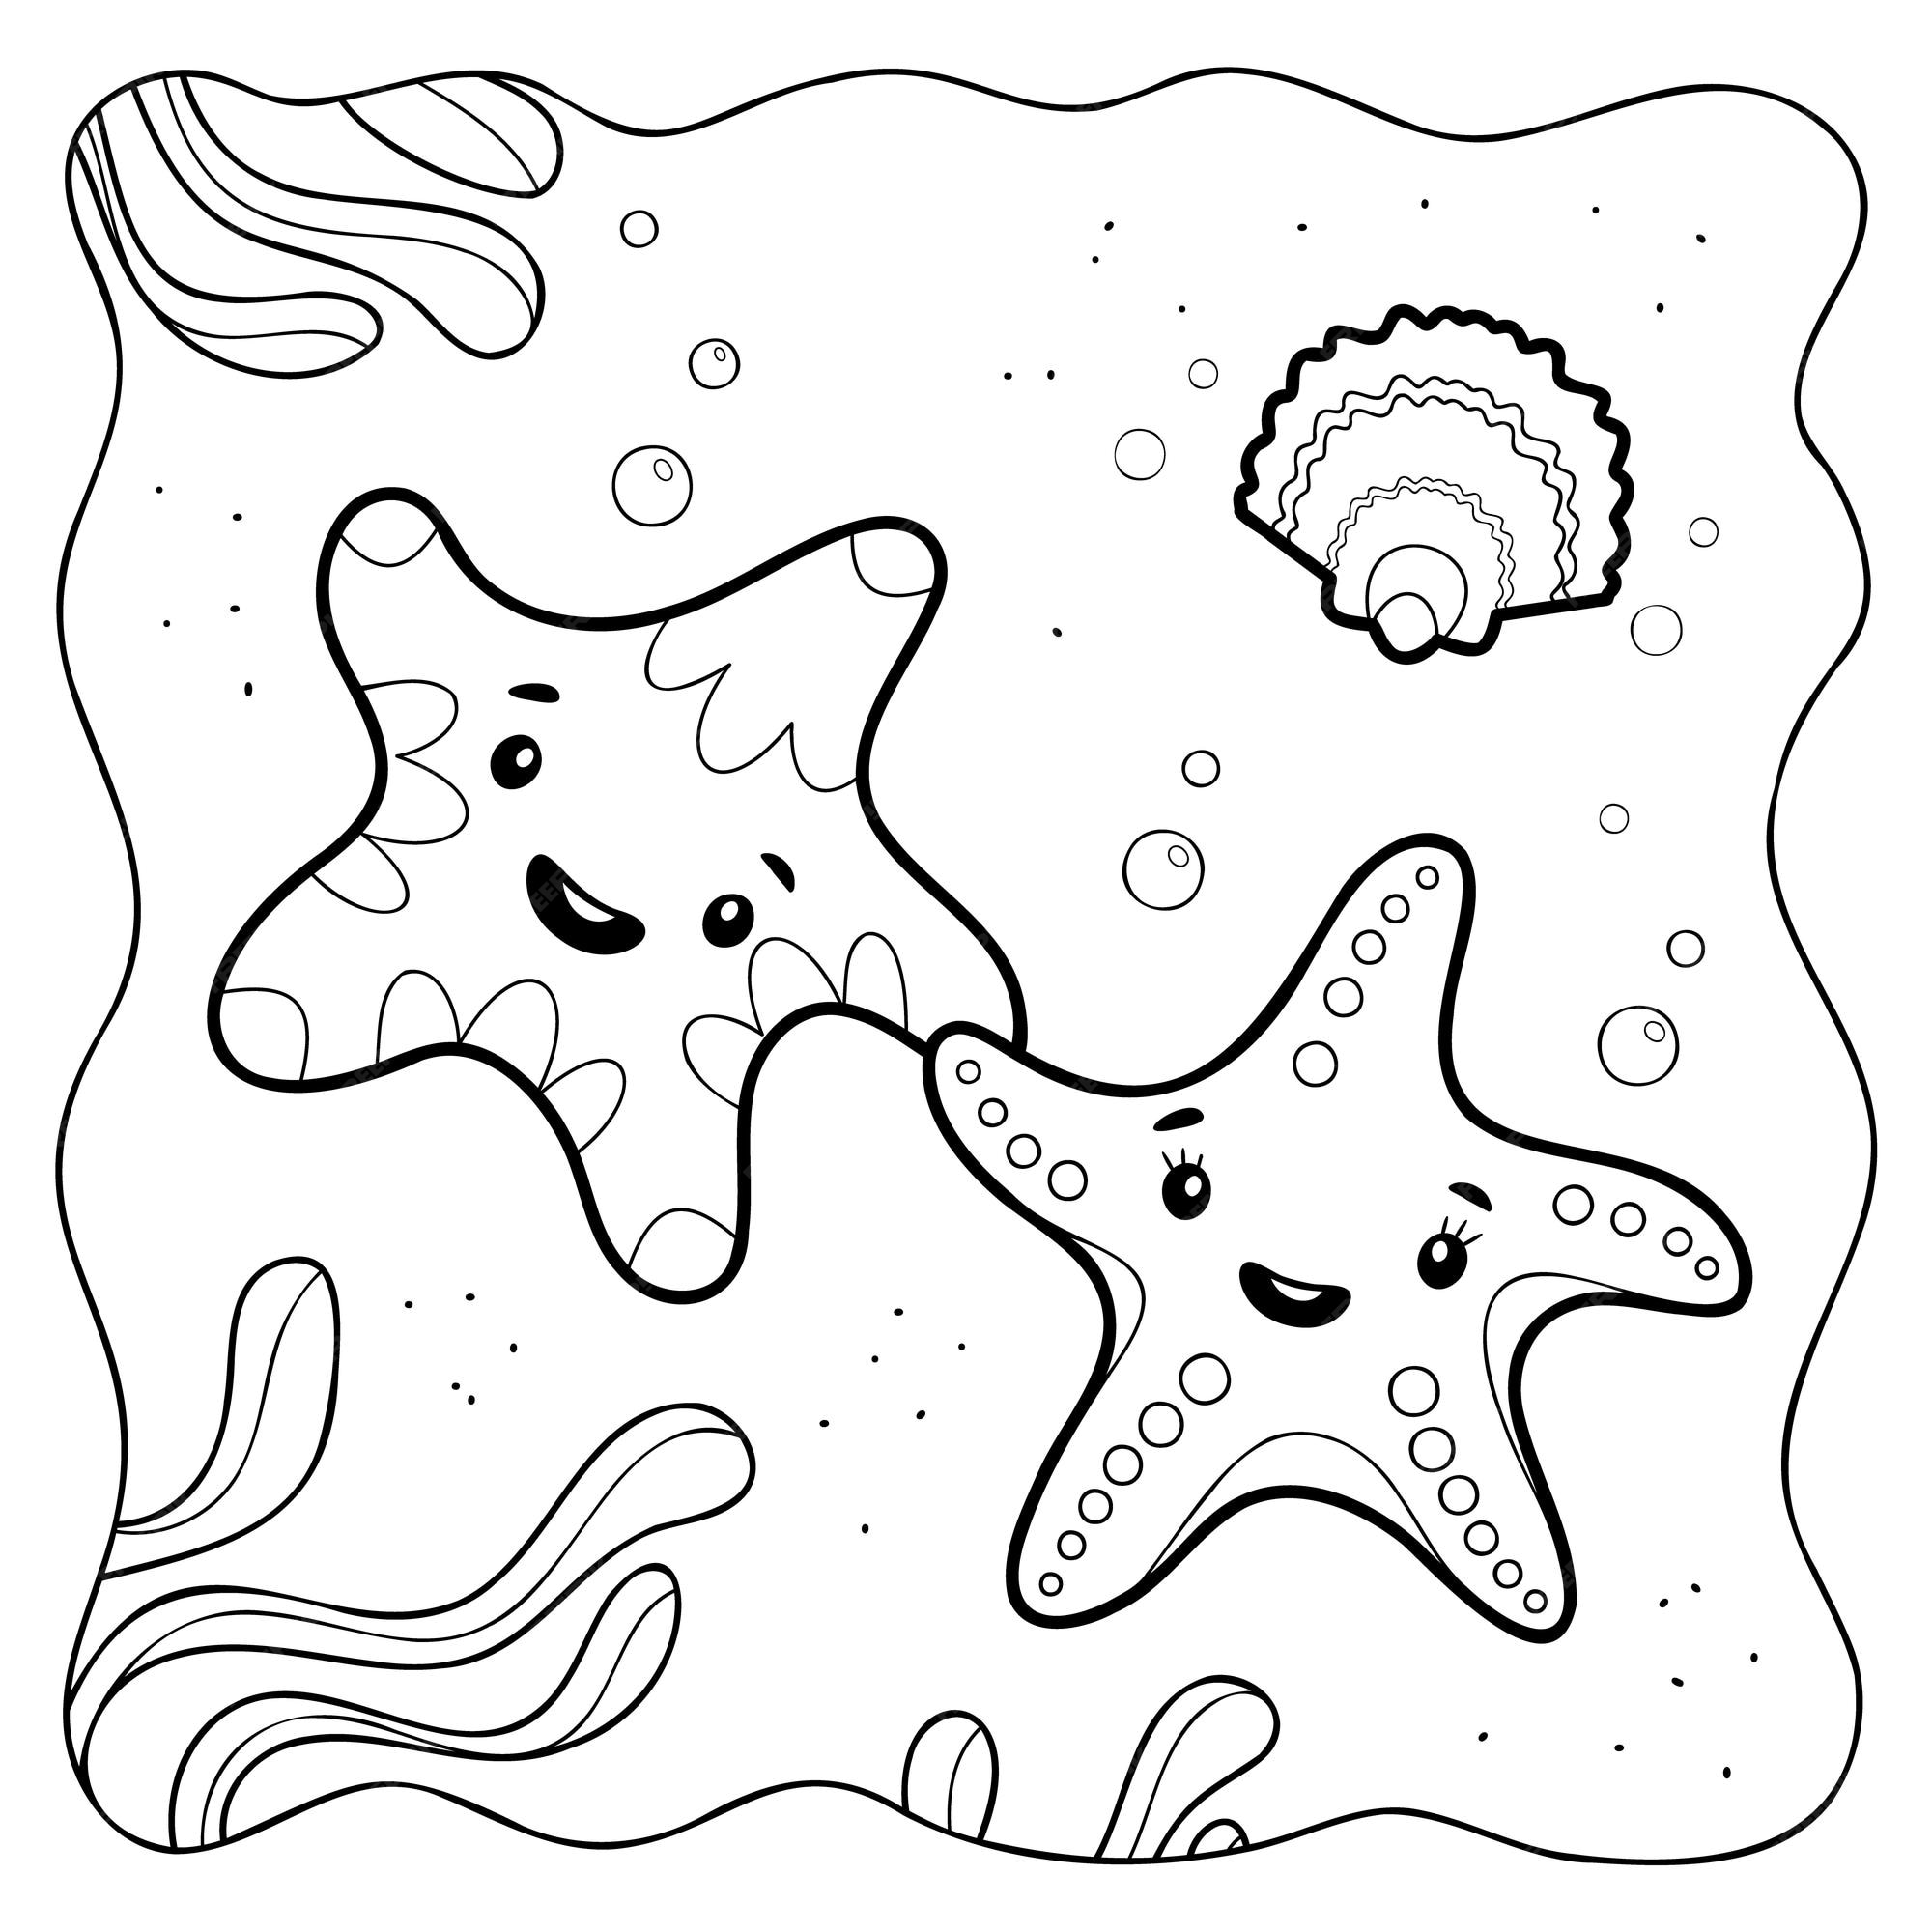 Premium vector starfish black and white coloring book or coloring page for kids marine background